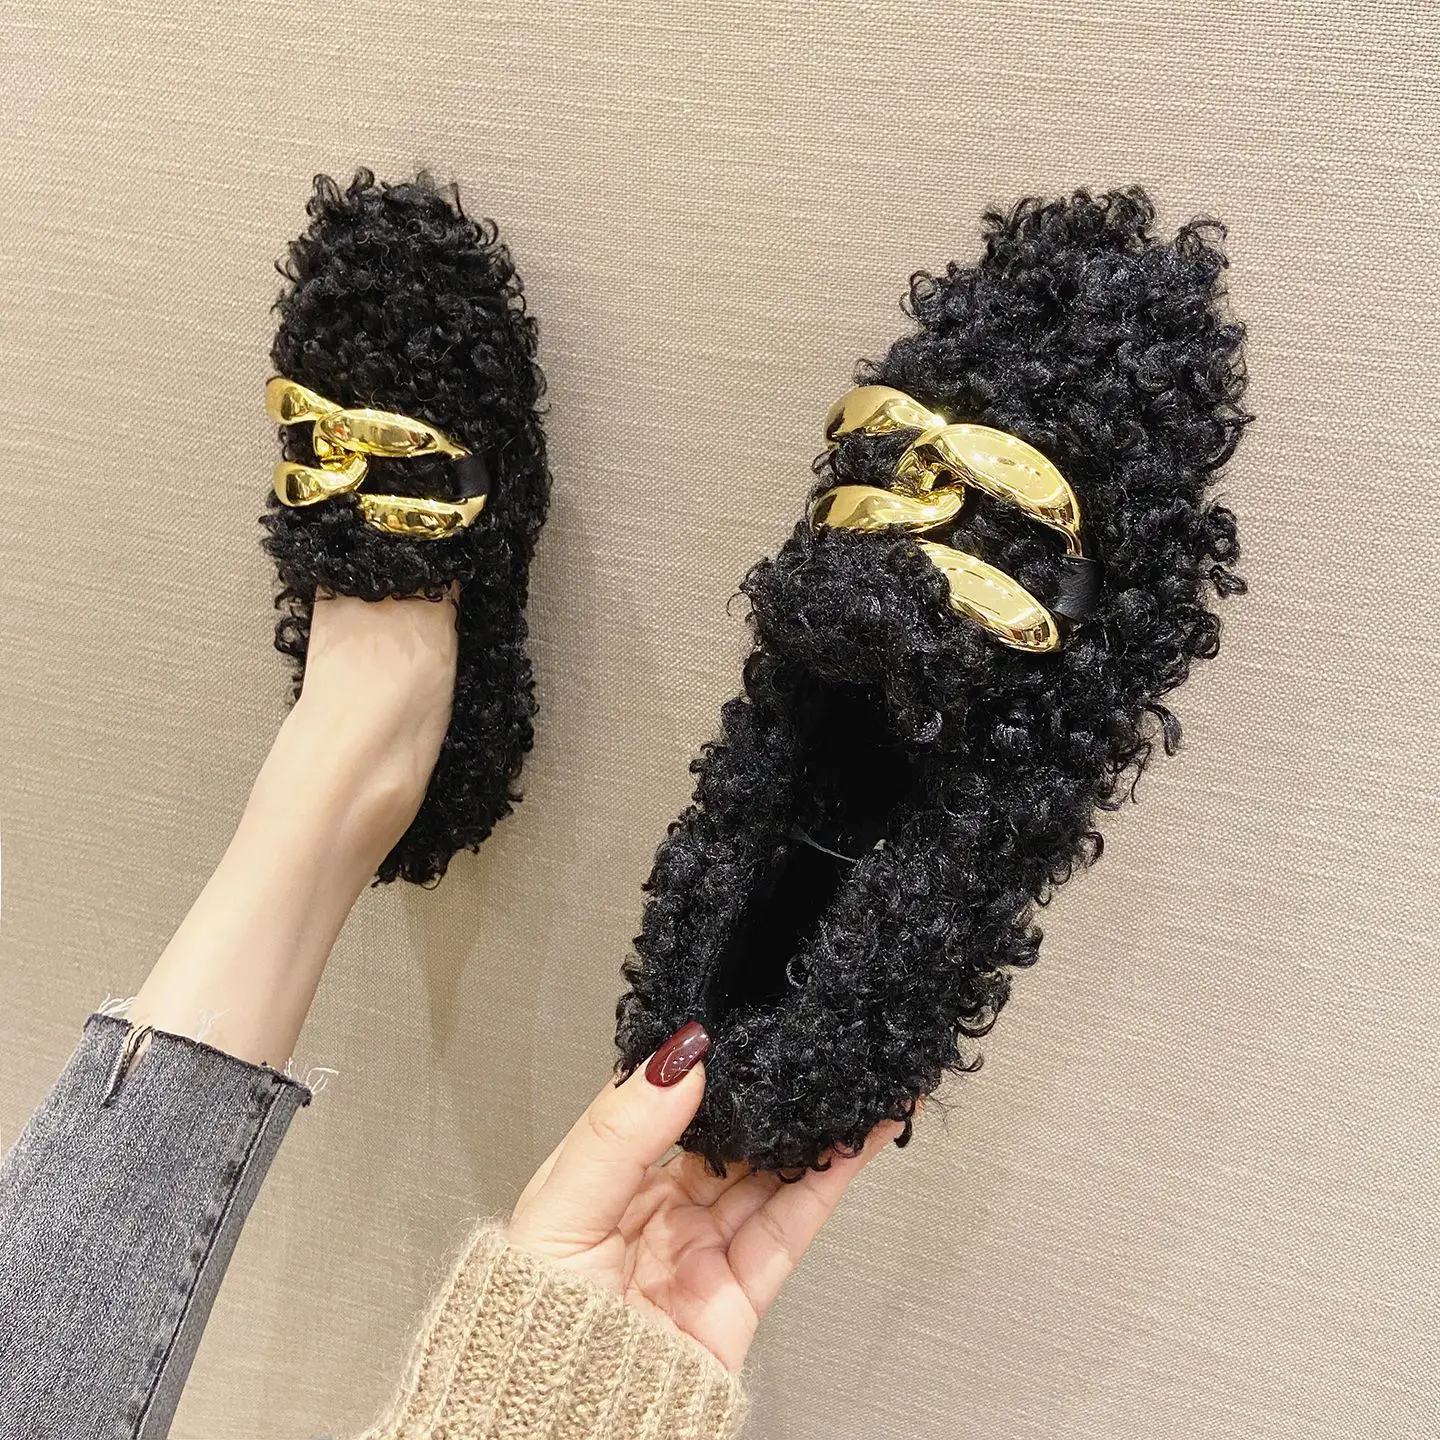 

Casual Woman Shoe Modis Slip-on Loafers Fur Round Toe Clogs Platform Shallow Mouth Moccasin 2021 Slip On Creepers Winter Leisure